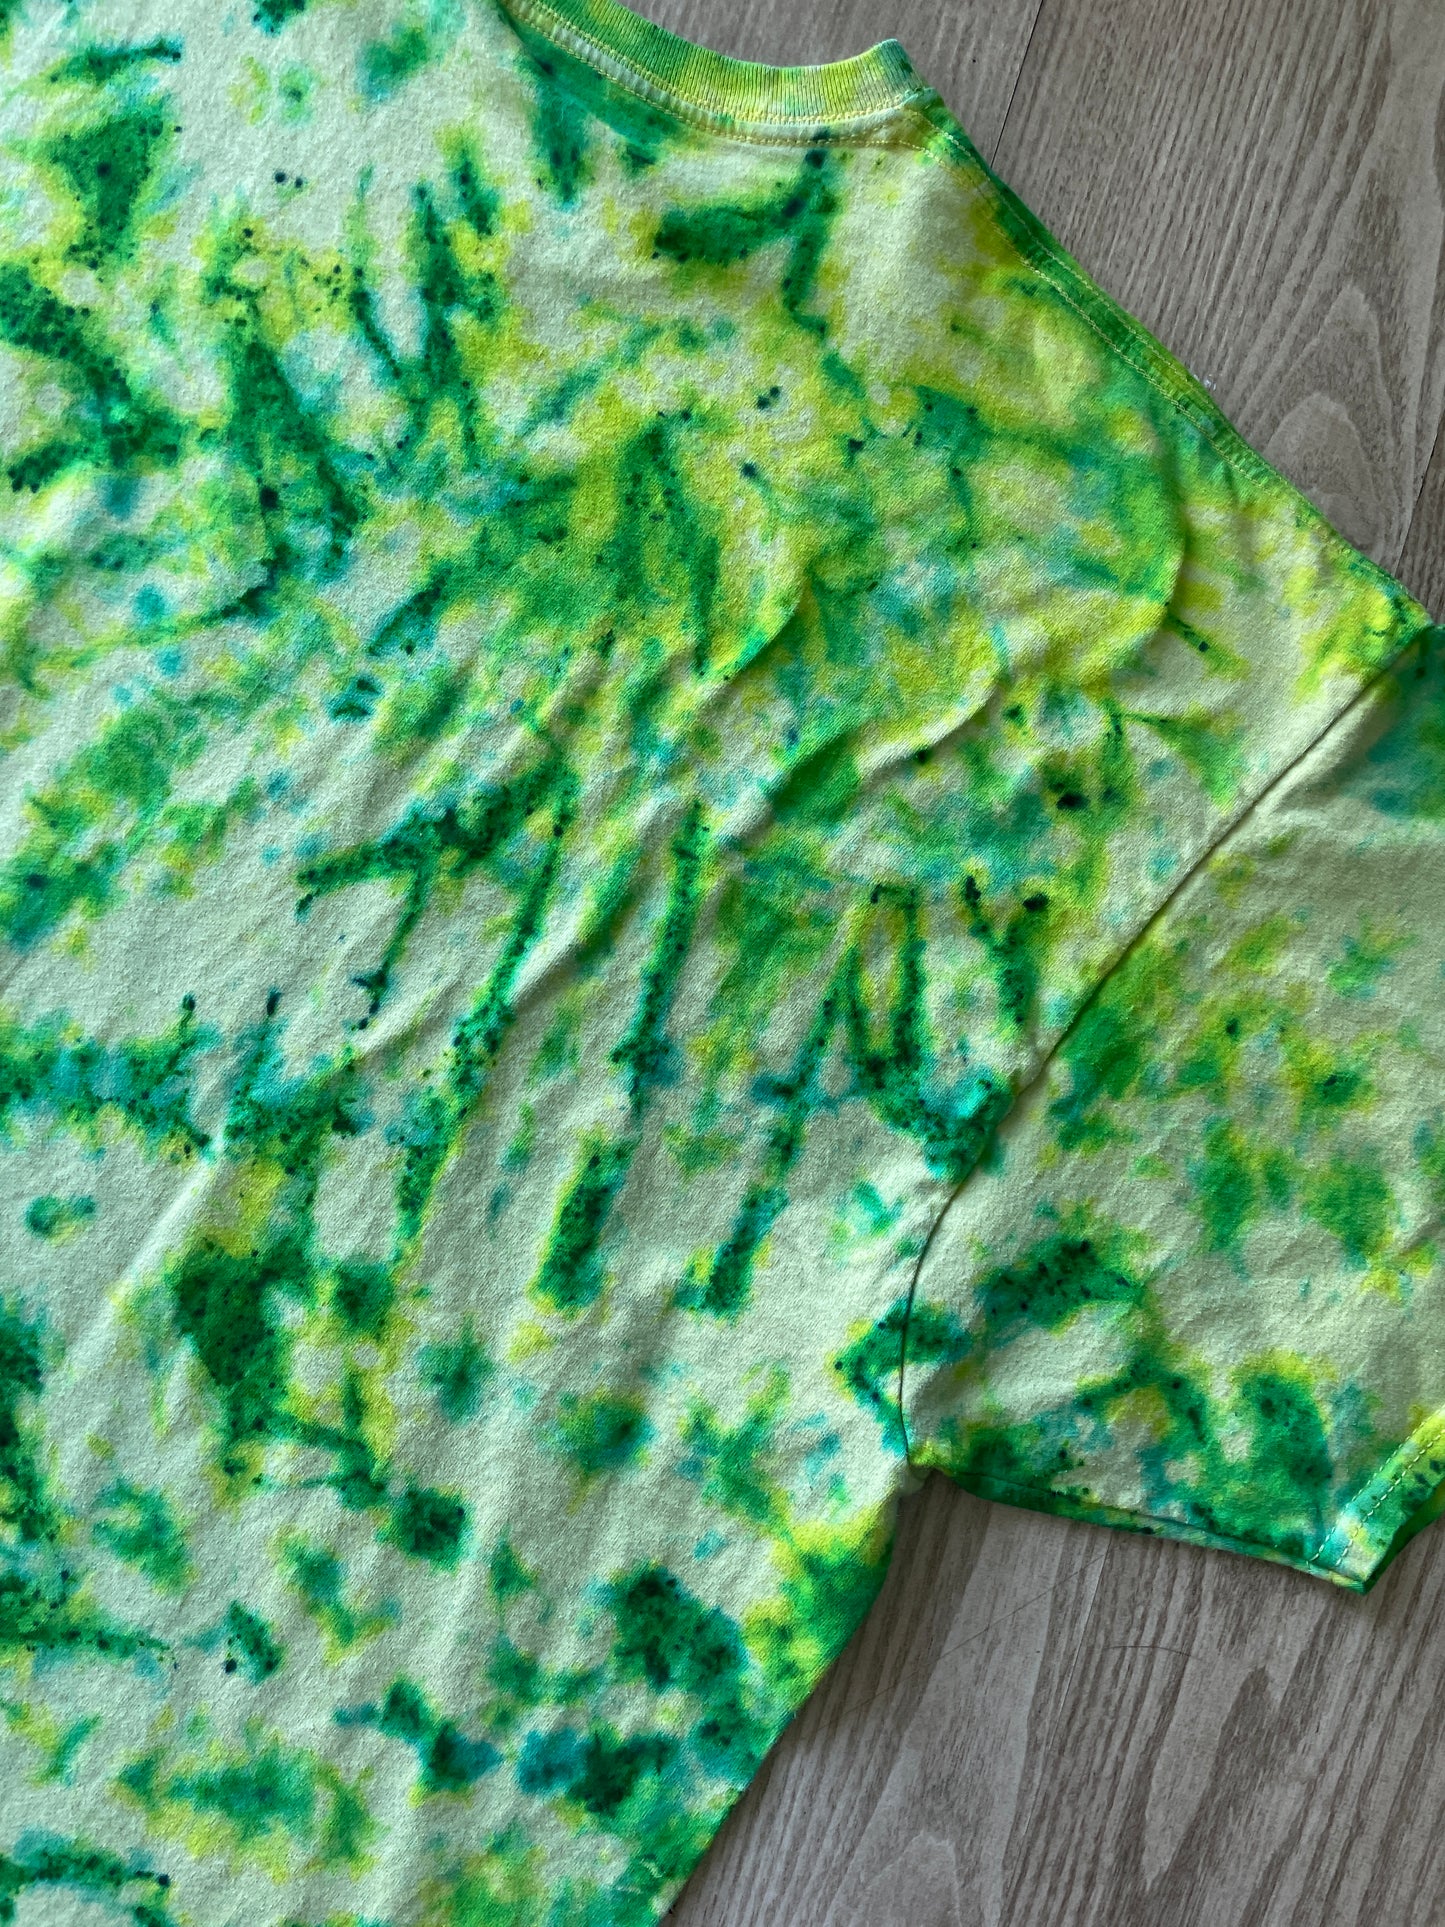 3XL Men’s Climbing Shoe Handmade Tie Dyed T-Shirt | One-Of-a-Kind Yellow, Blue, and Green Crumpled Short Sleeve